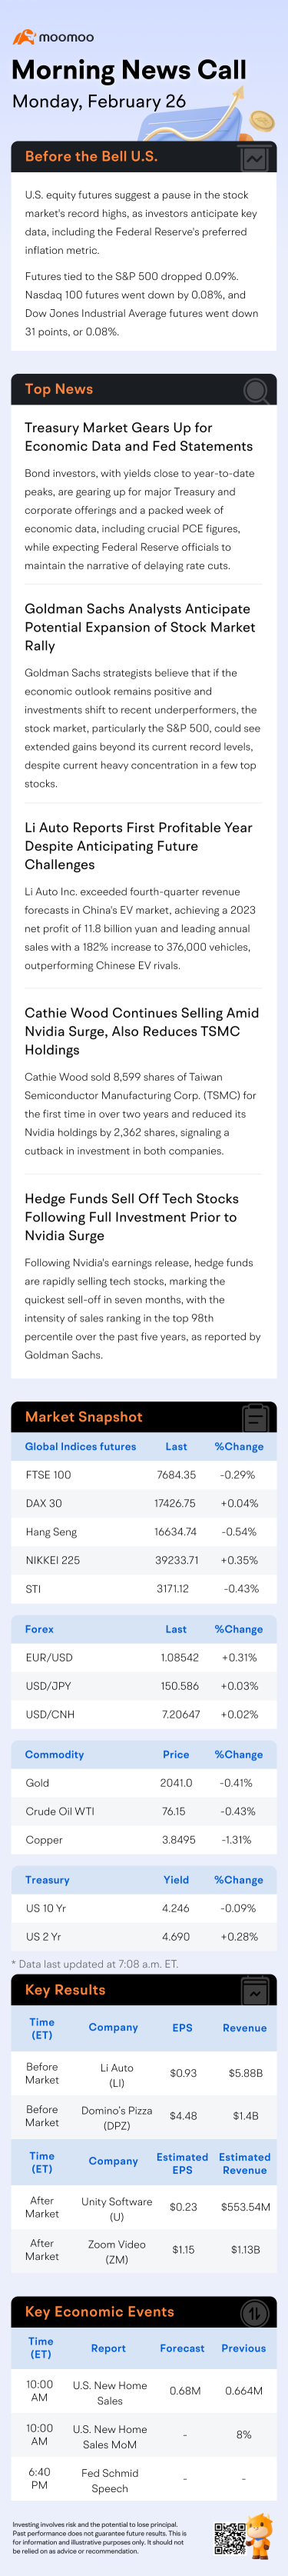 Morning News Call | Goldman Sachs Analysts Anticipate Potential Expansion of Stock Market Rally